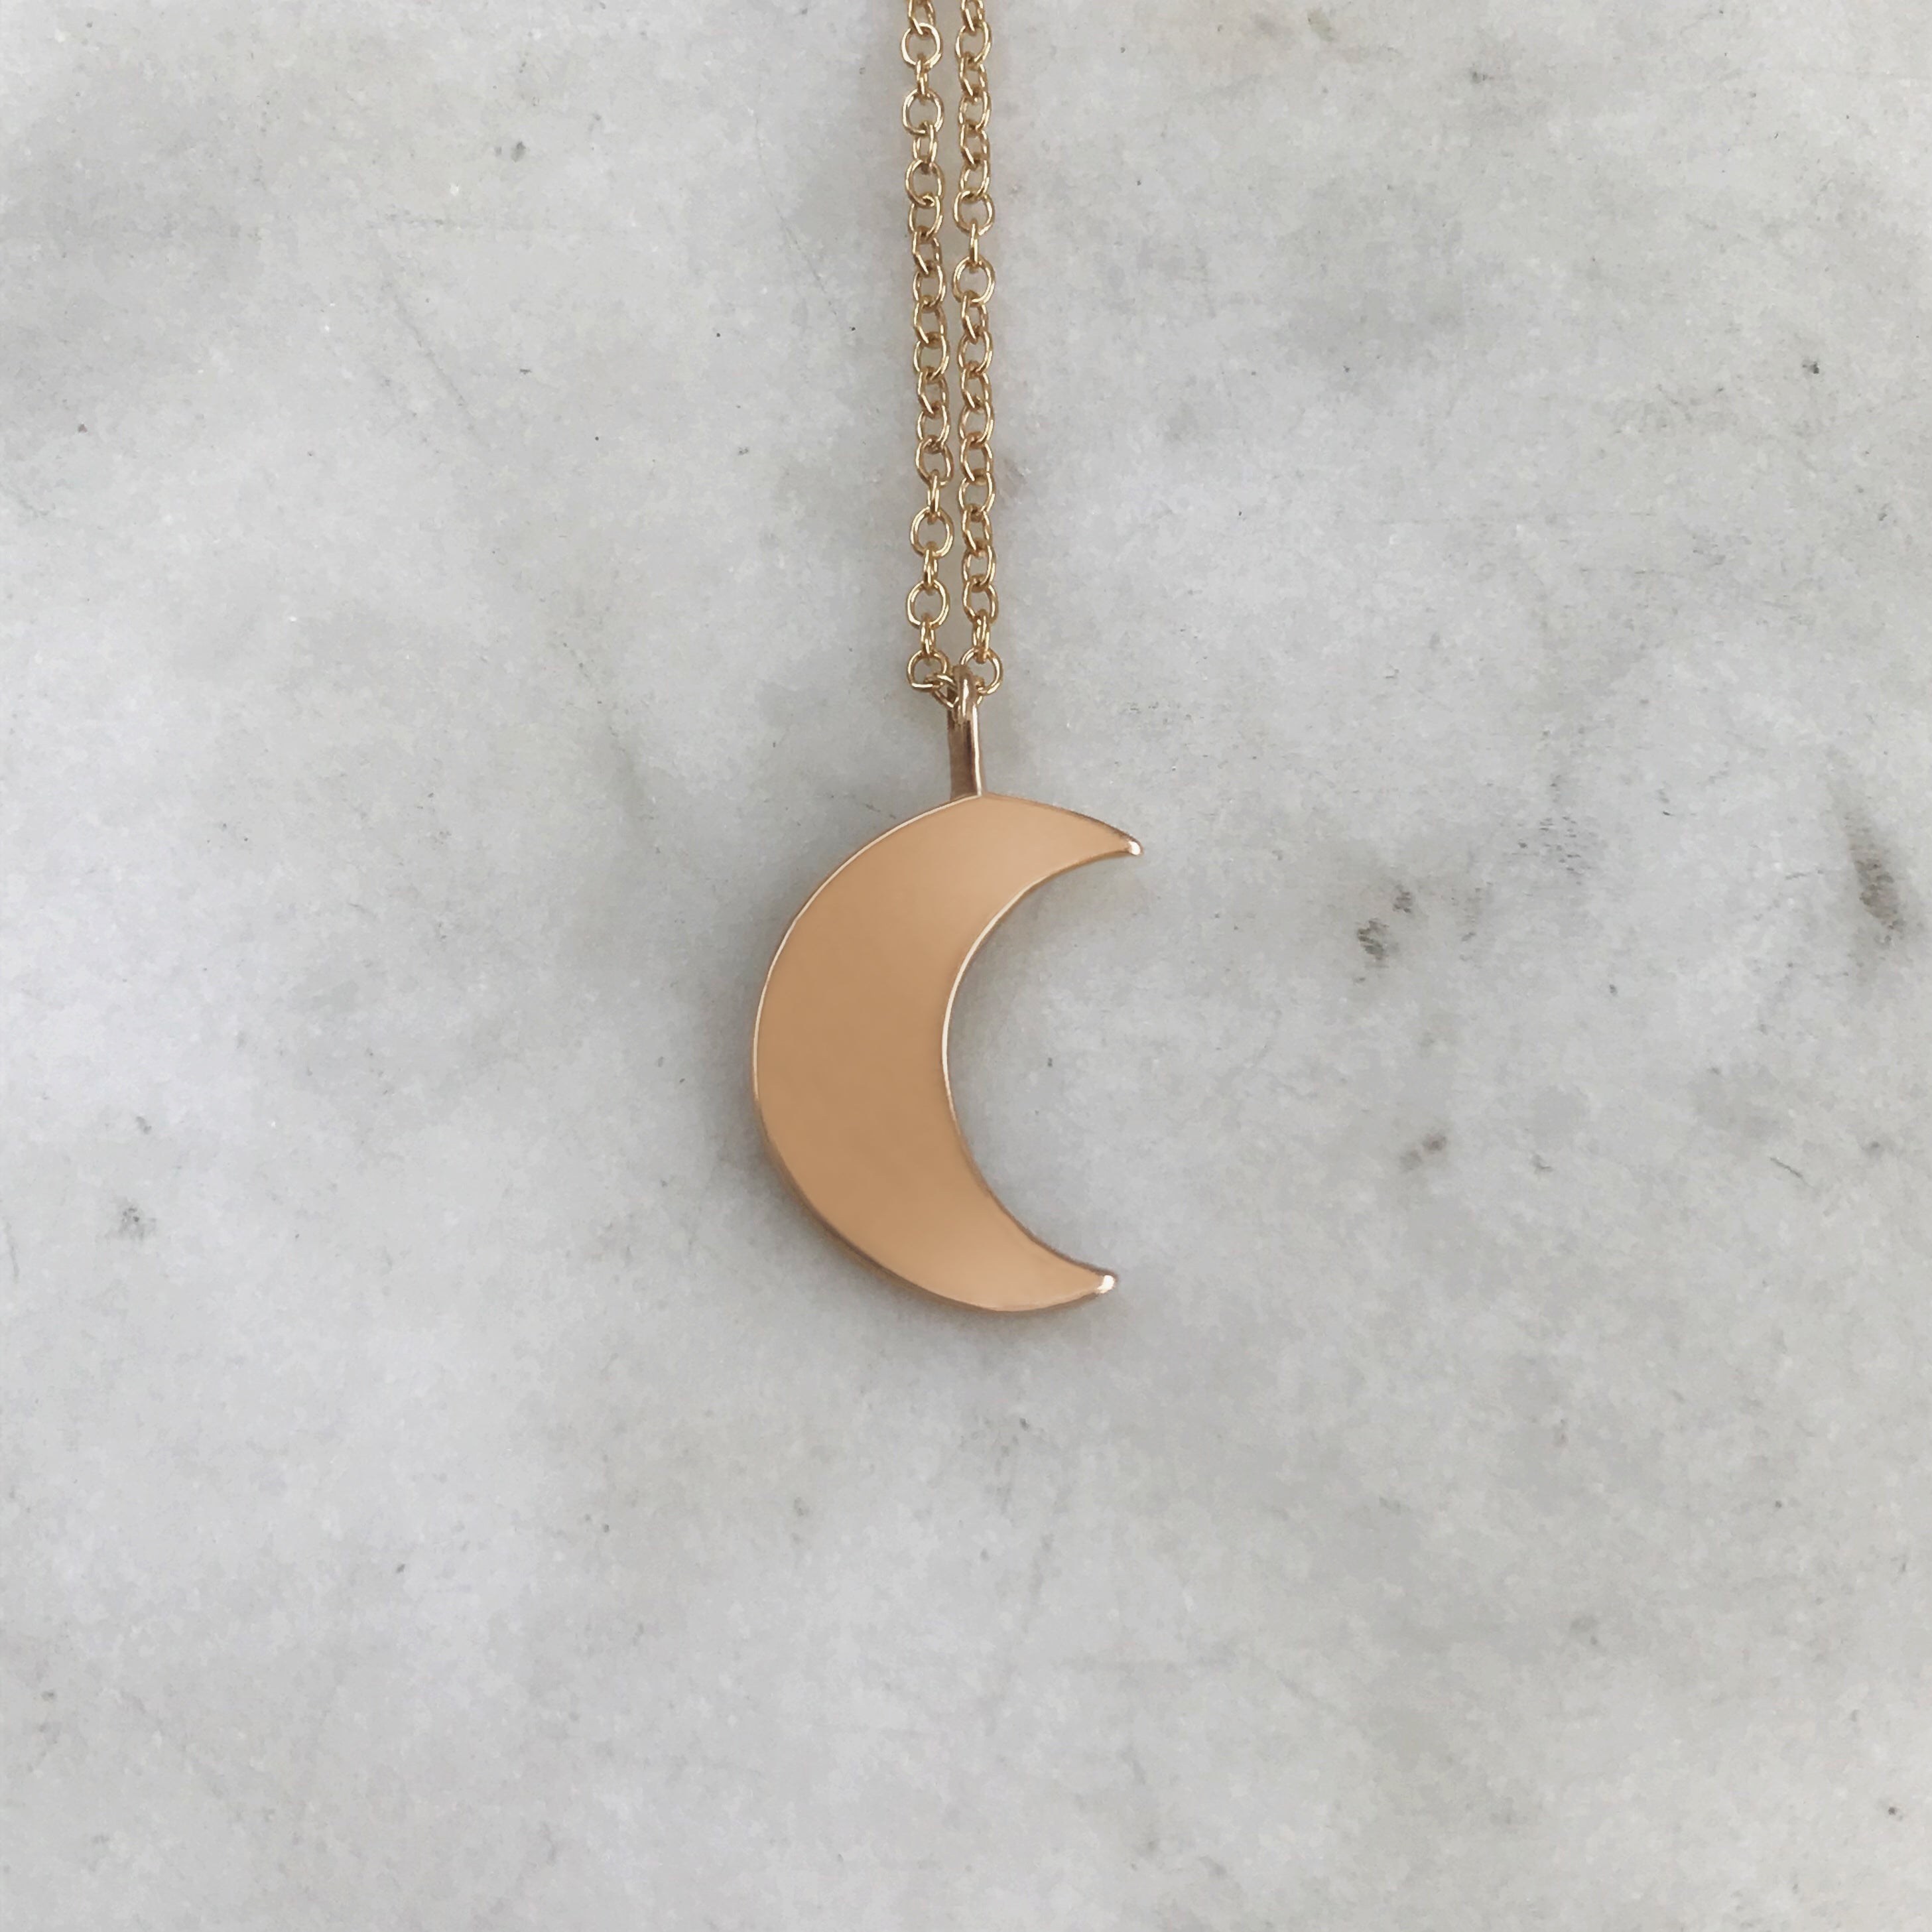 Buy Crescent Moon Necklace, Half Moon Necklace, Gold Half Moon Pendant,  Silver Crescent Moon Jewelry, Moon Phase Necklace Online in India - Etsy